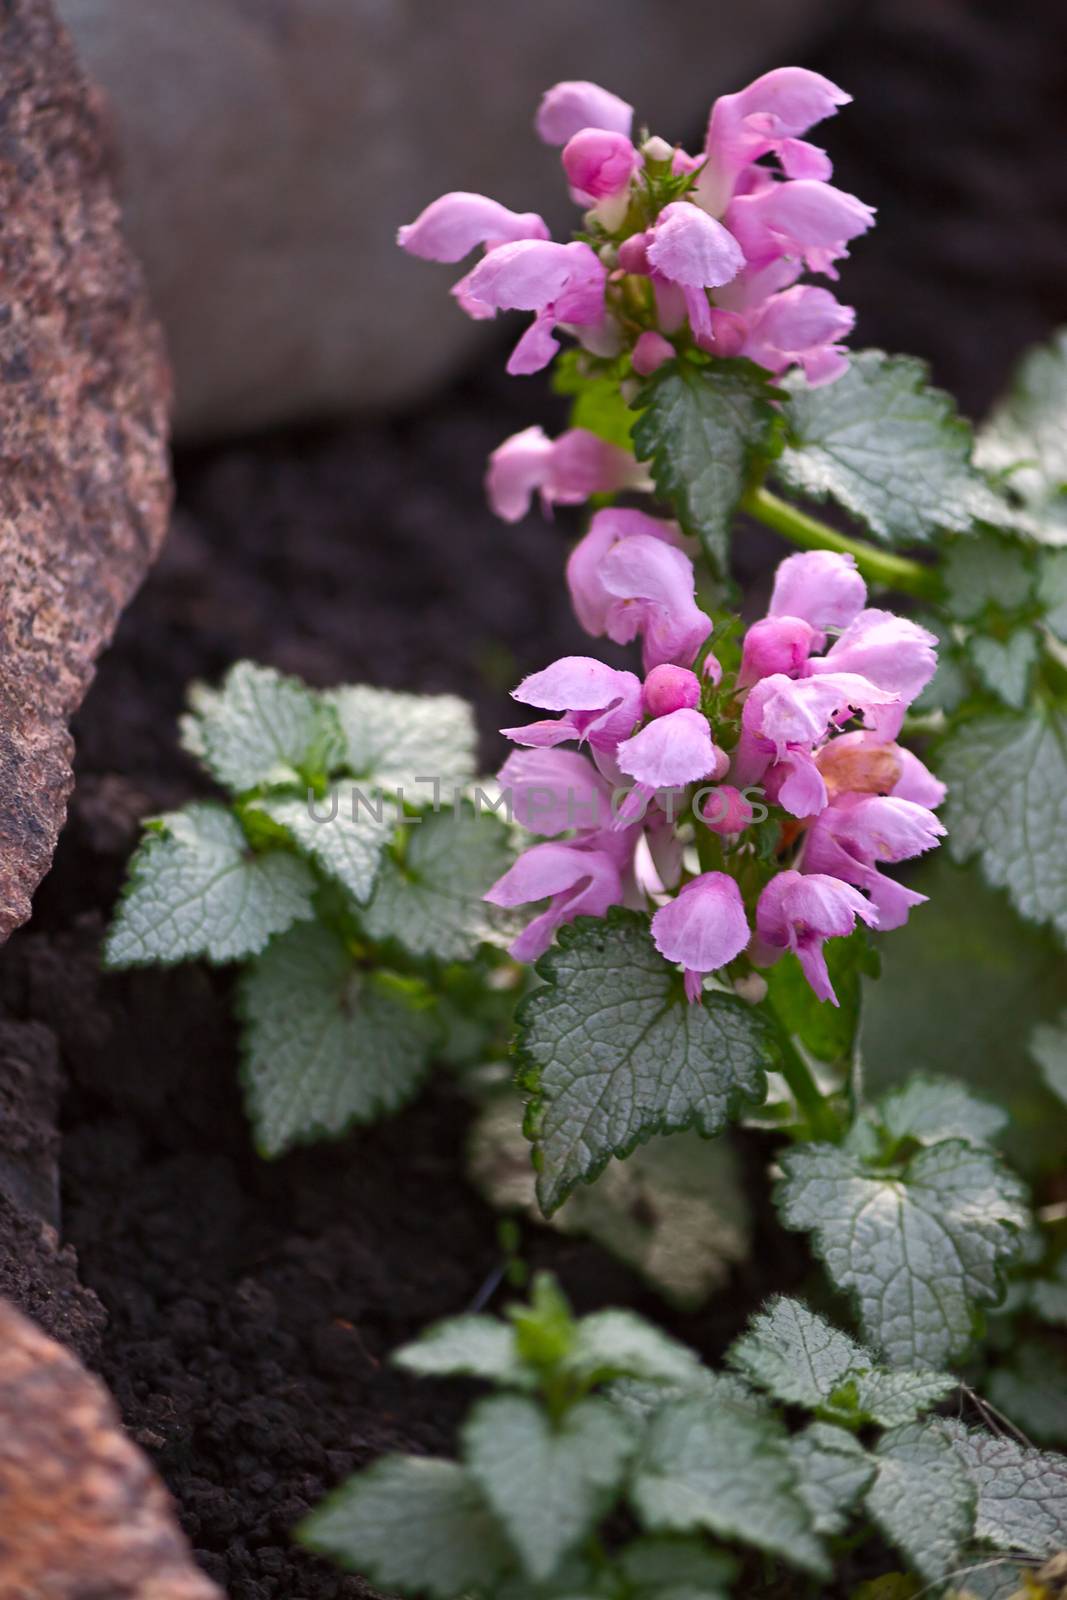 Pink flowers and leaves Dead nettle close-up on  background of  stones.